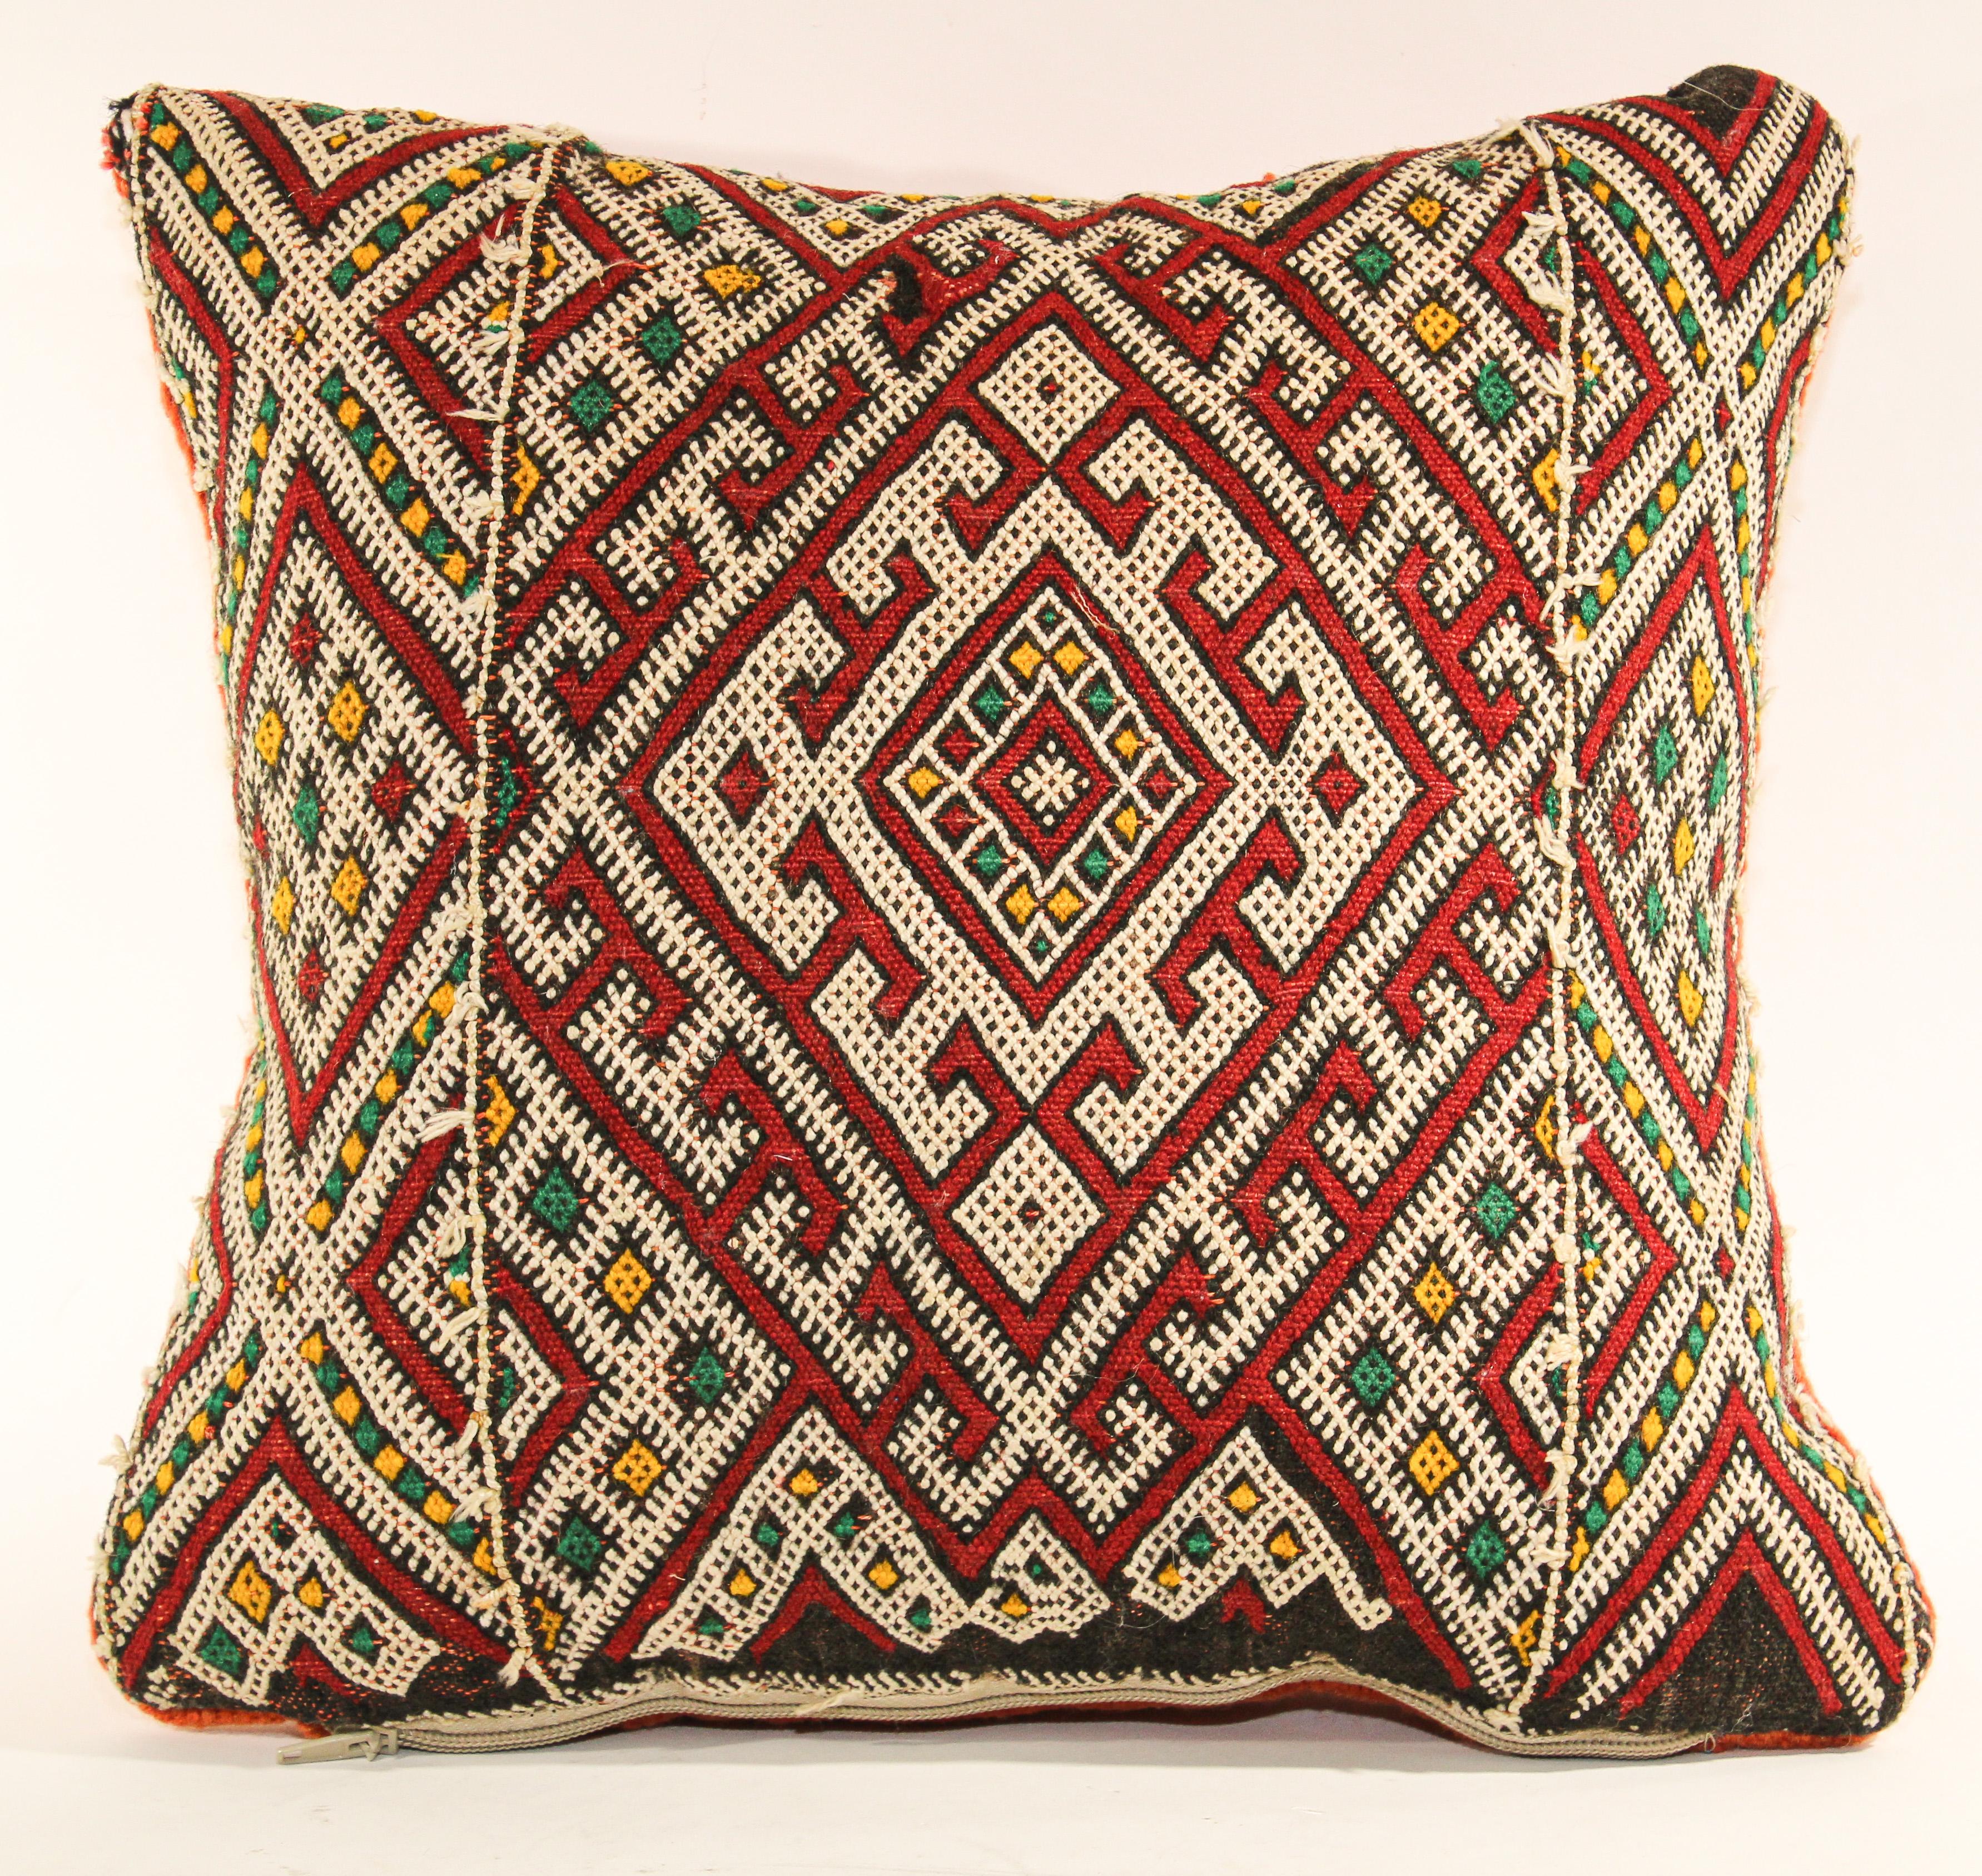 Moroccan Ethnic Berber handwoven tribal throw pillow made from a vintage rug.
The front and the back are made from a different rug, front is more elaborate and back is more plain.
Geometric North African tribal designs in red, white and black and